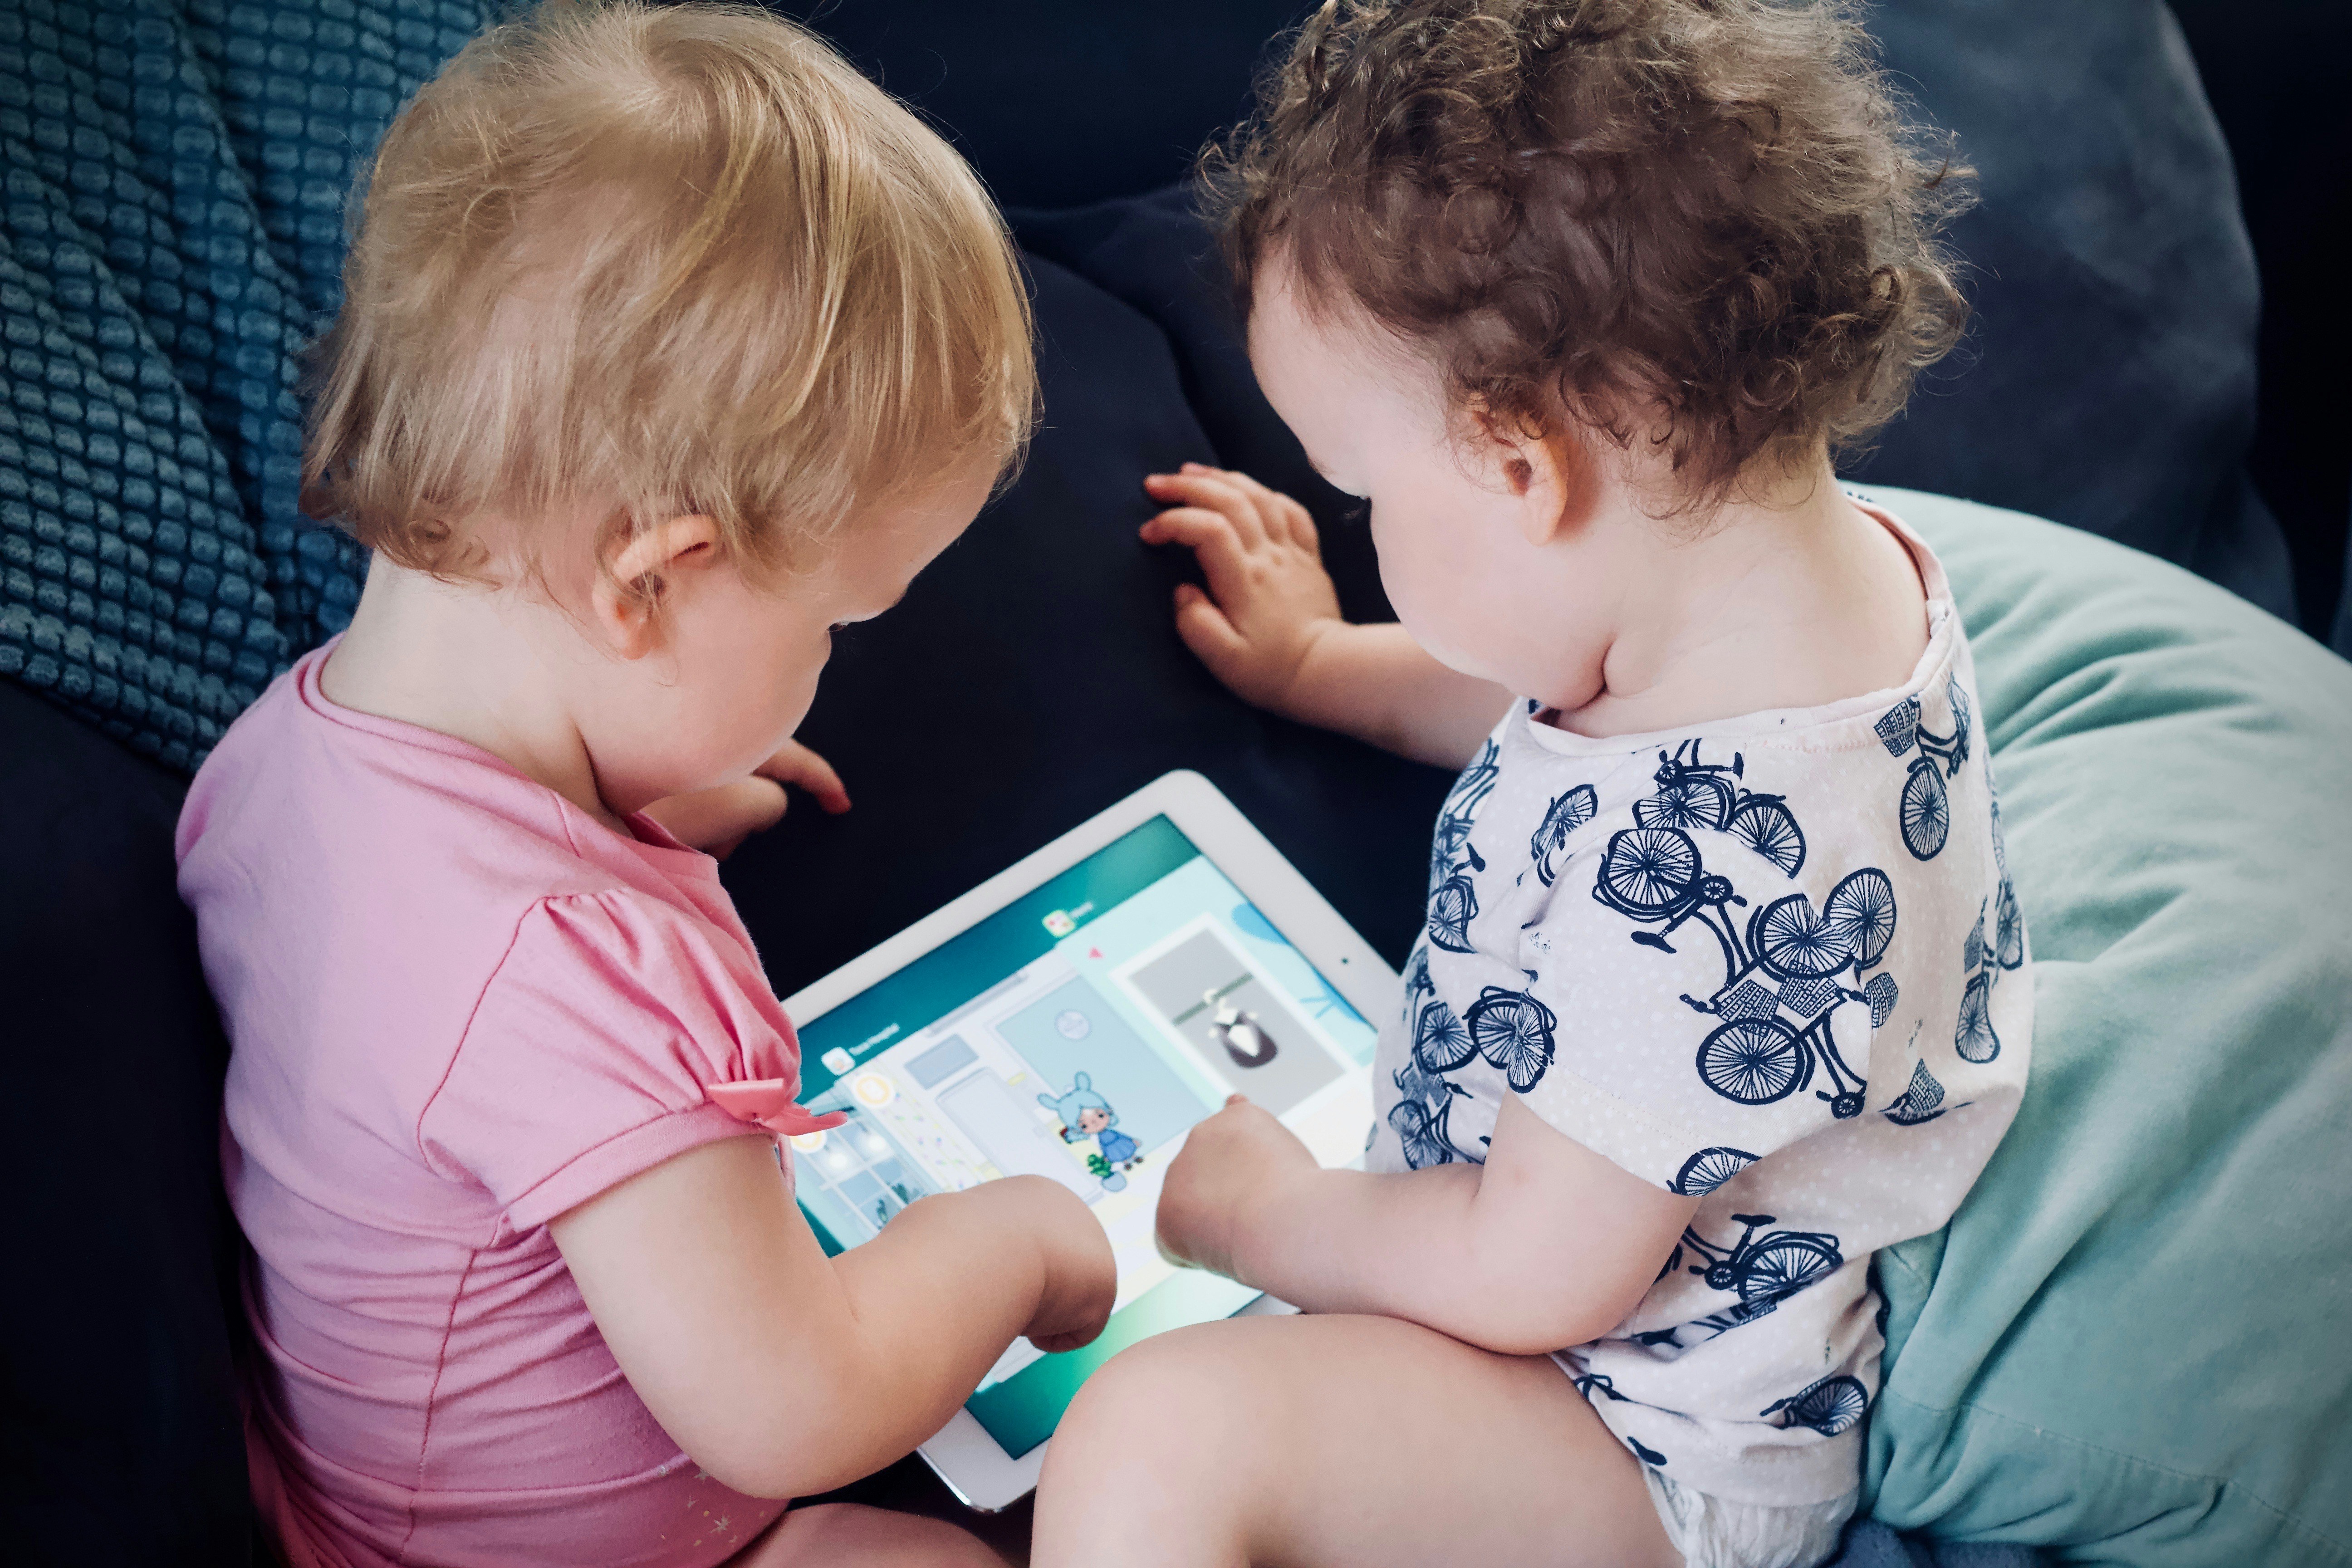 Two kids busy on their tab | Source: Unsplash